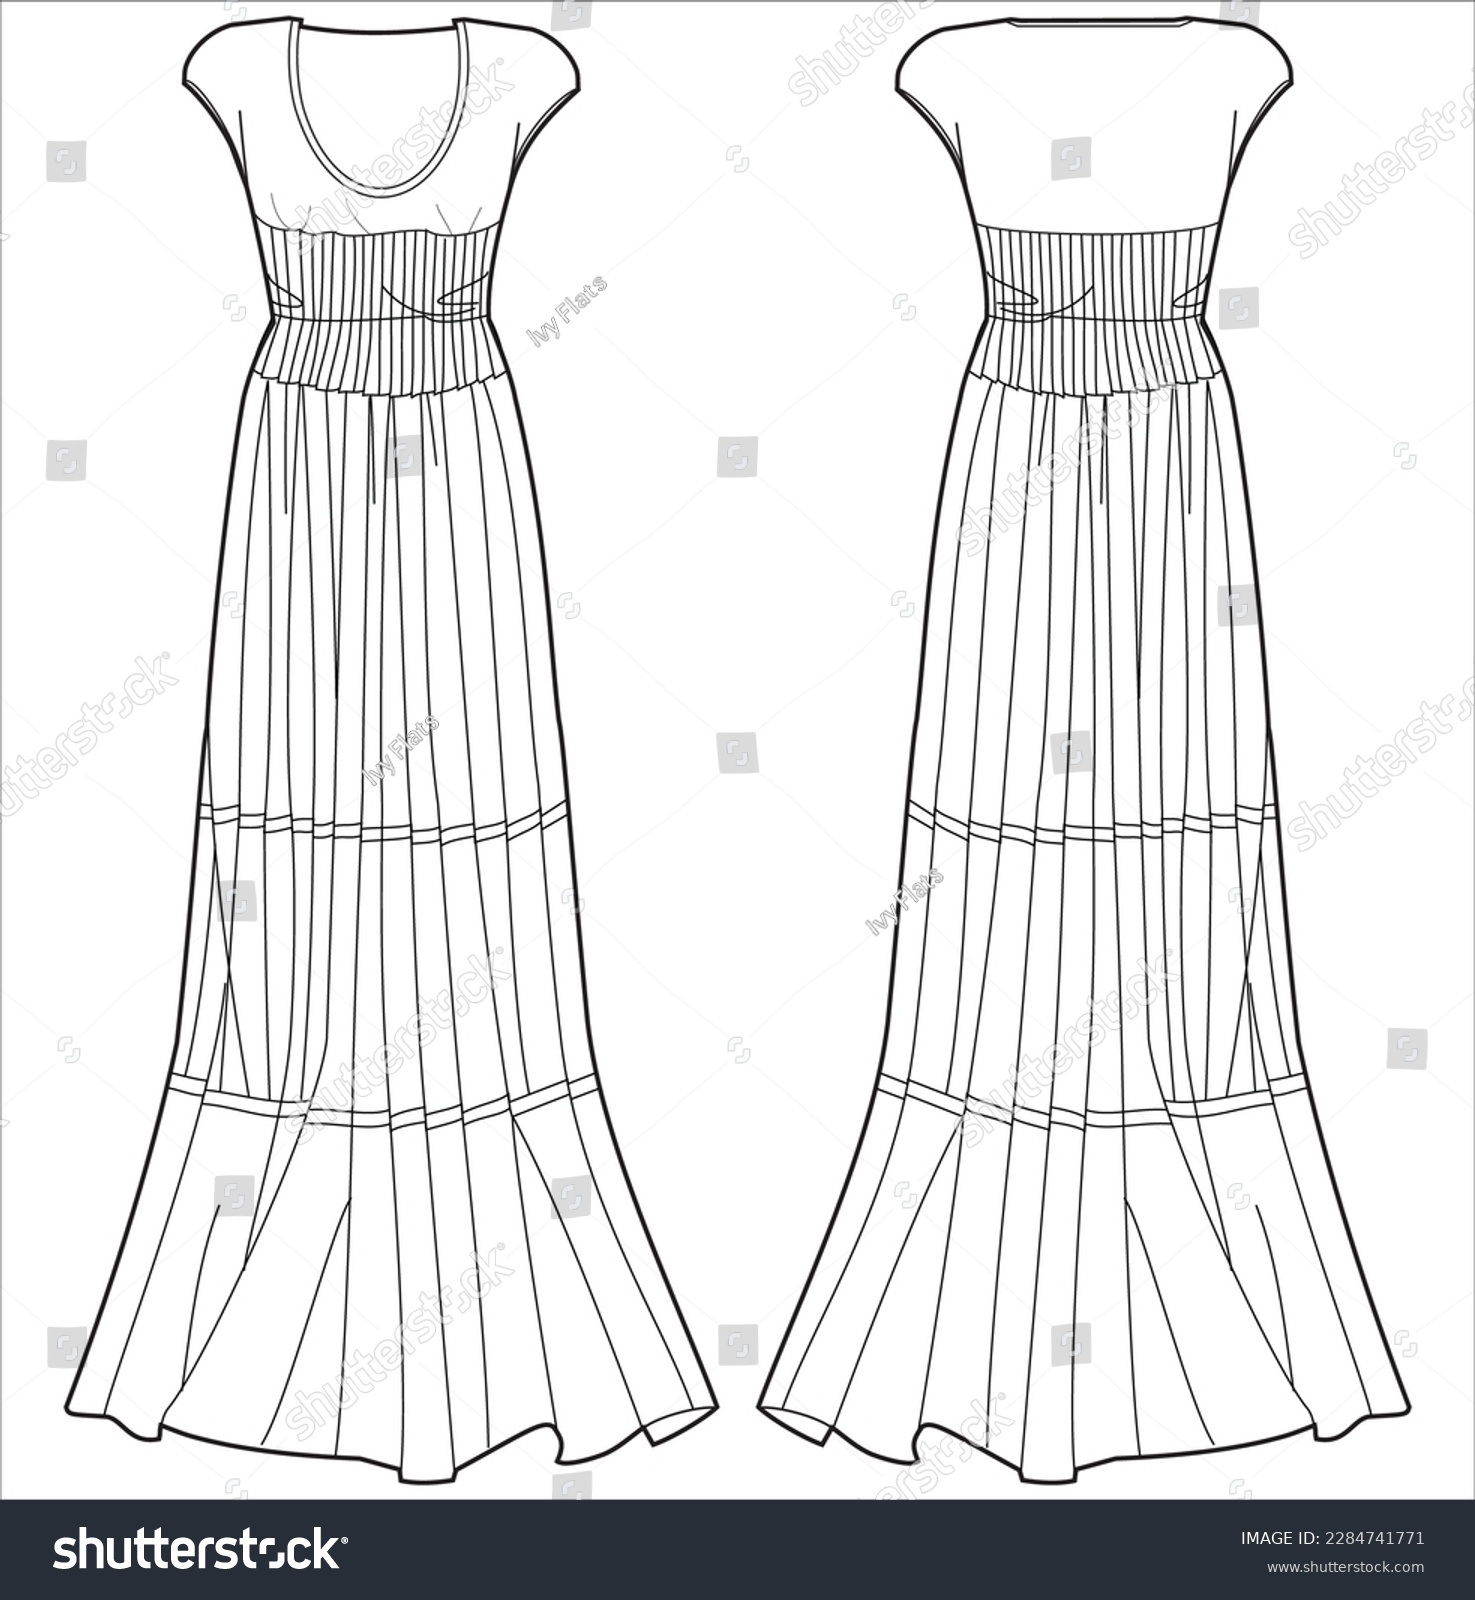 SVG of Maggie sleeve column wedding dress design flat sketch fashion illustration with front and back view, U neck pleated trumpet bridal dress flat sketch cad drawing template svg